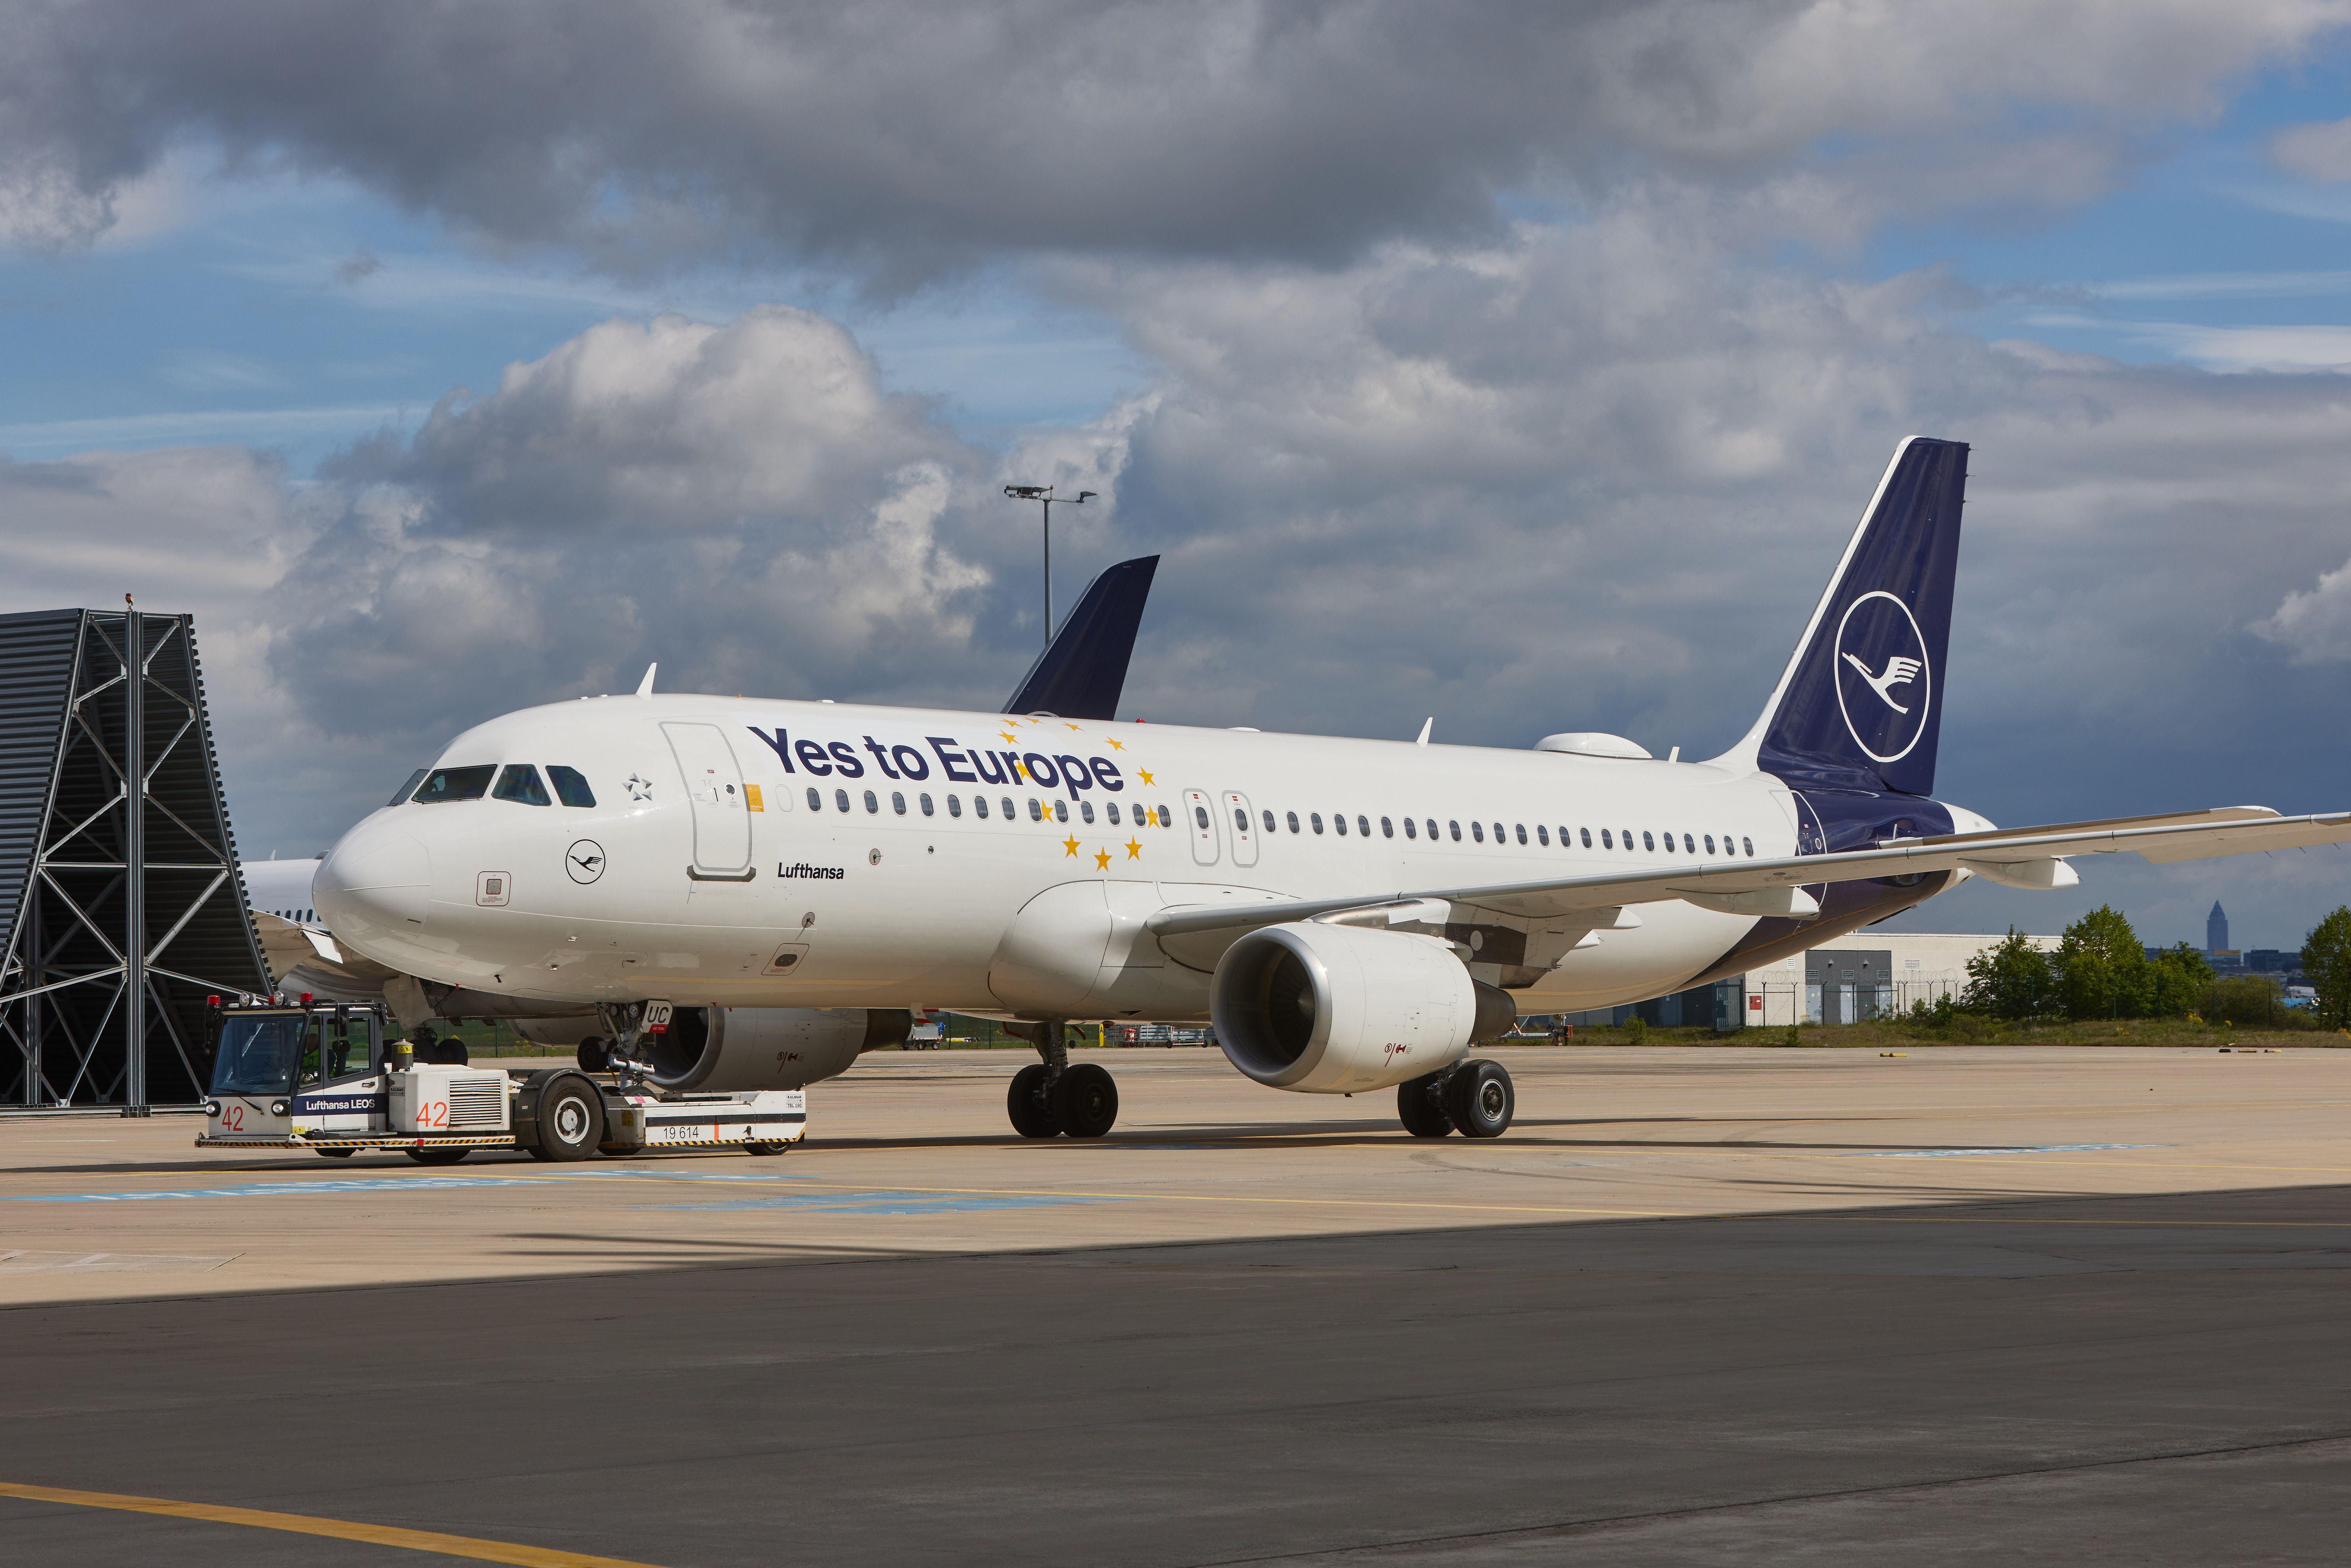 Lufthansa Airbus A320 Yes to Europe campaign at Franfkurt Airport FRA